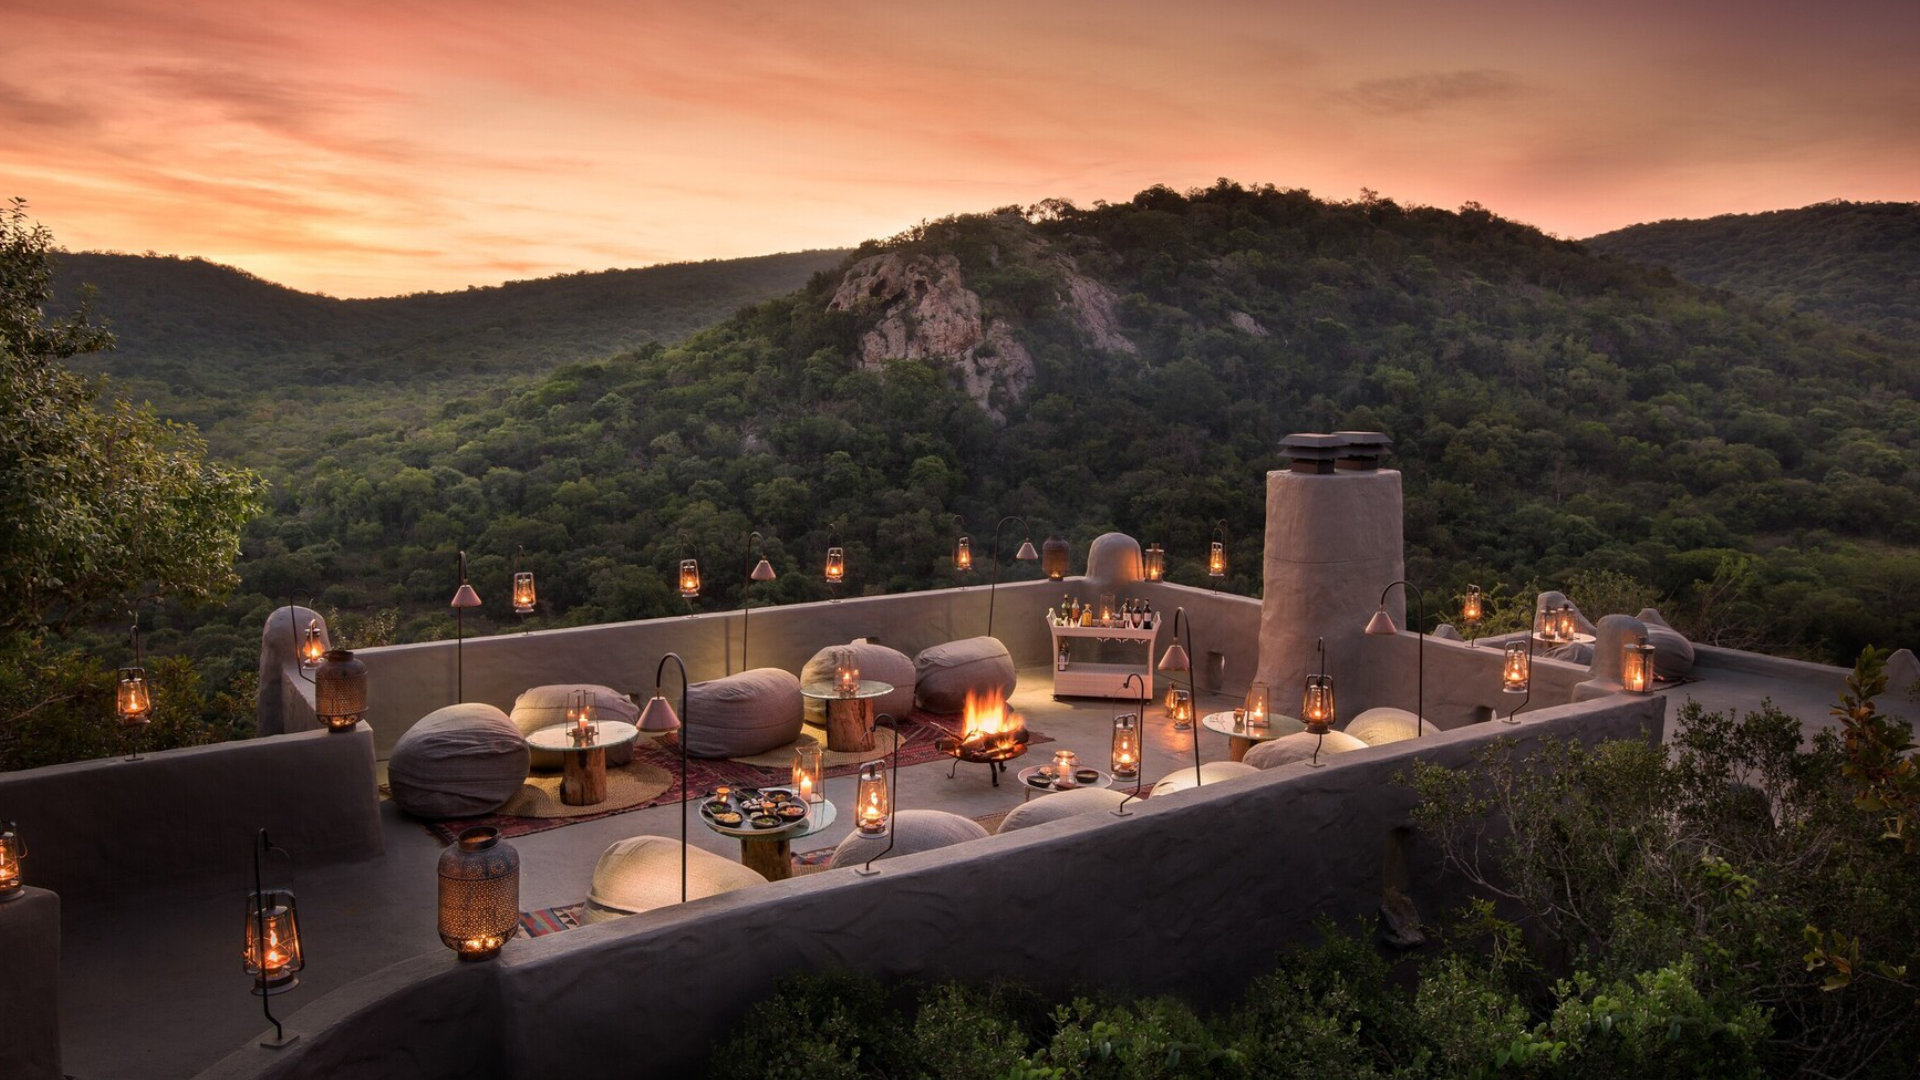 Luxury Safari in South Africa at the Phinda Rock Lodge